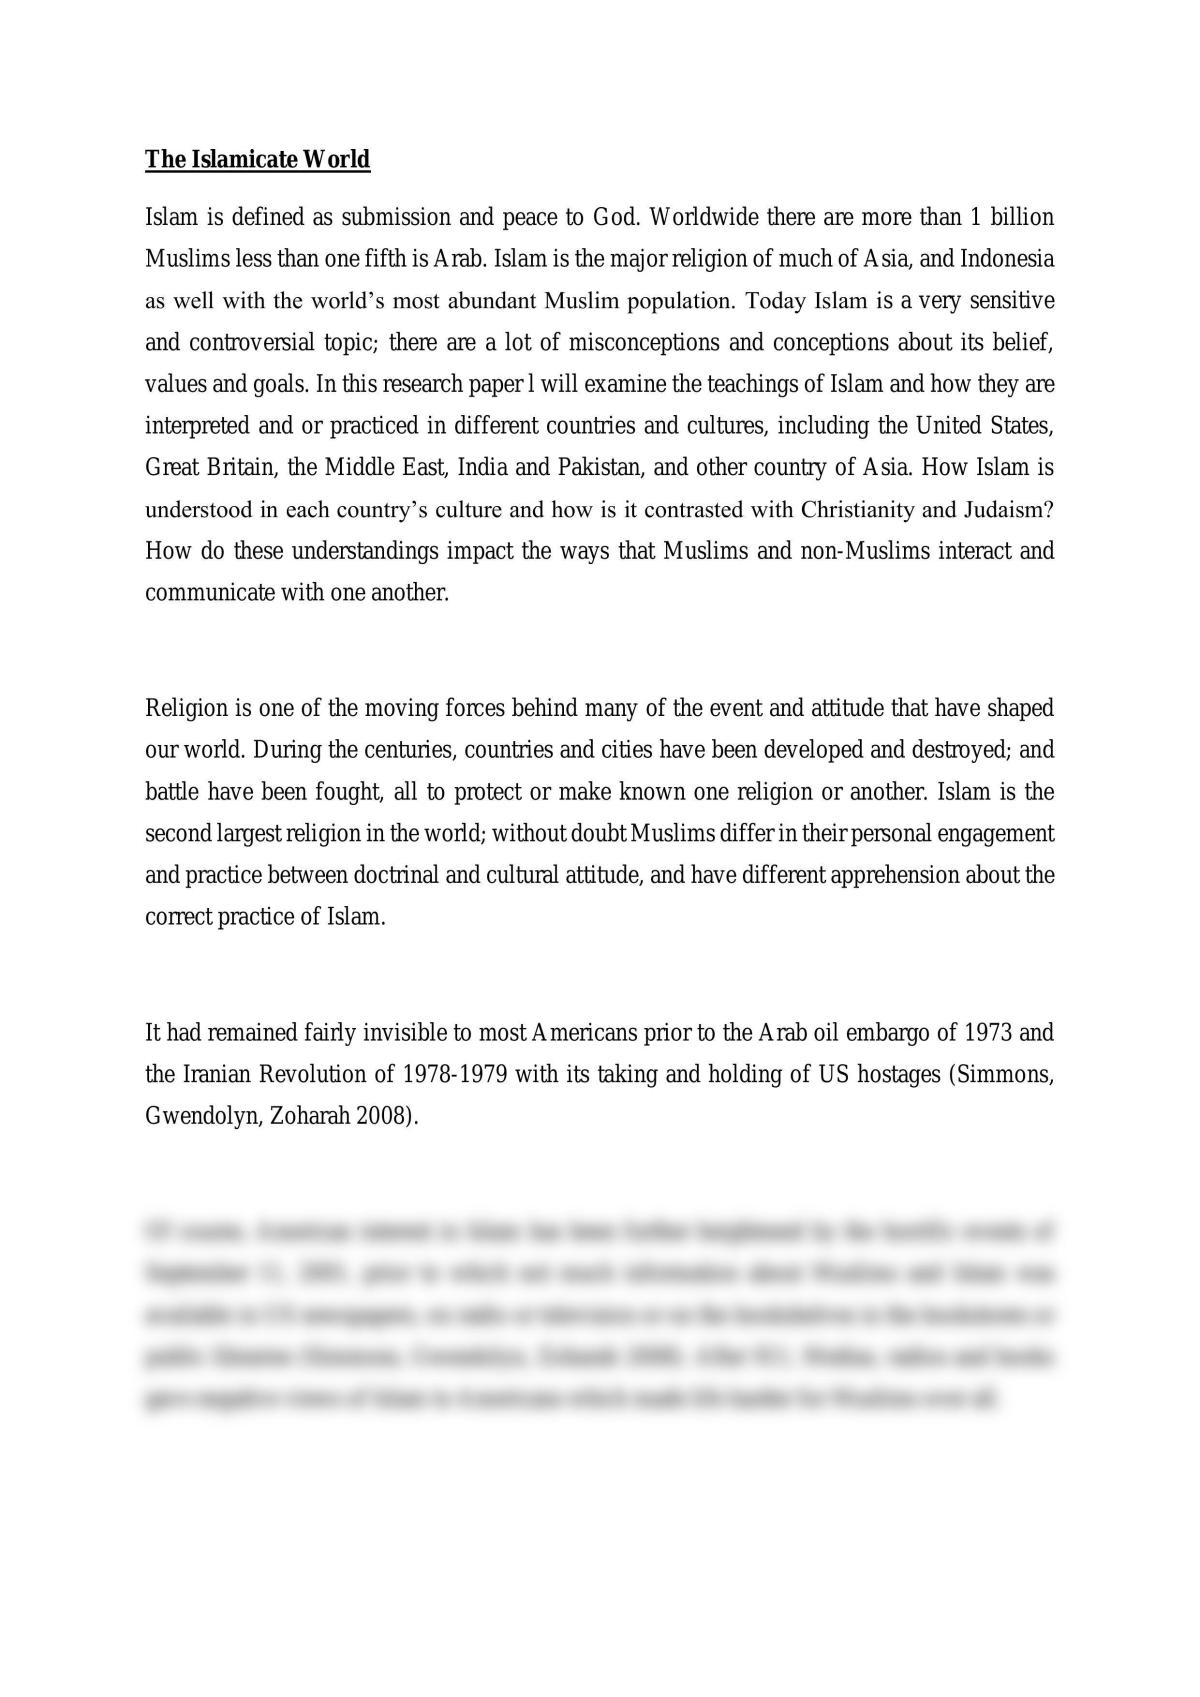 The islamicate world essay - Page 1